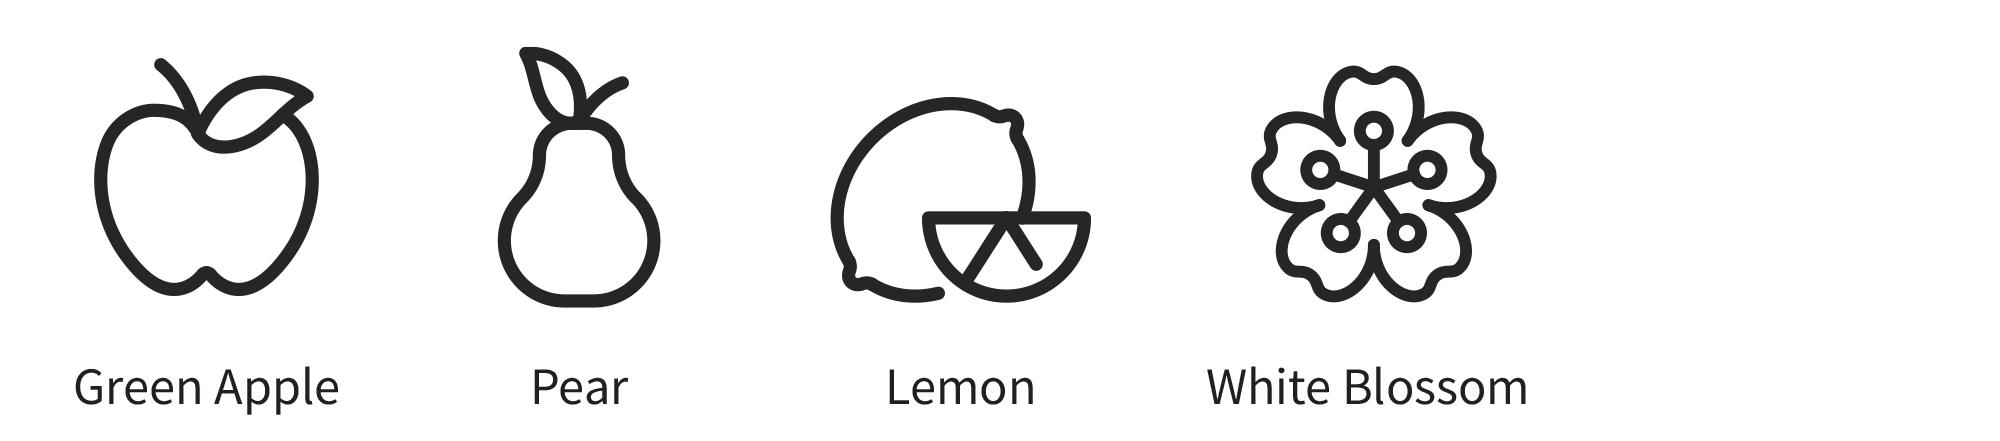 unoaked flavor icons